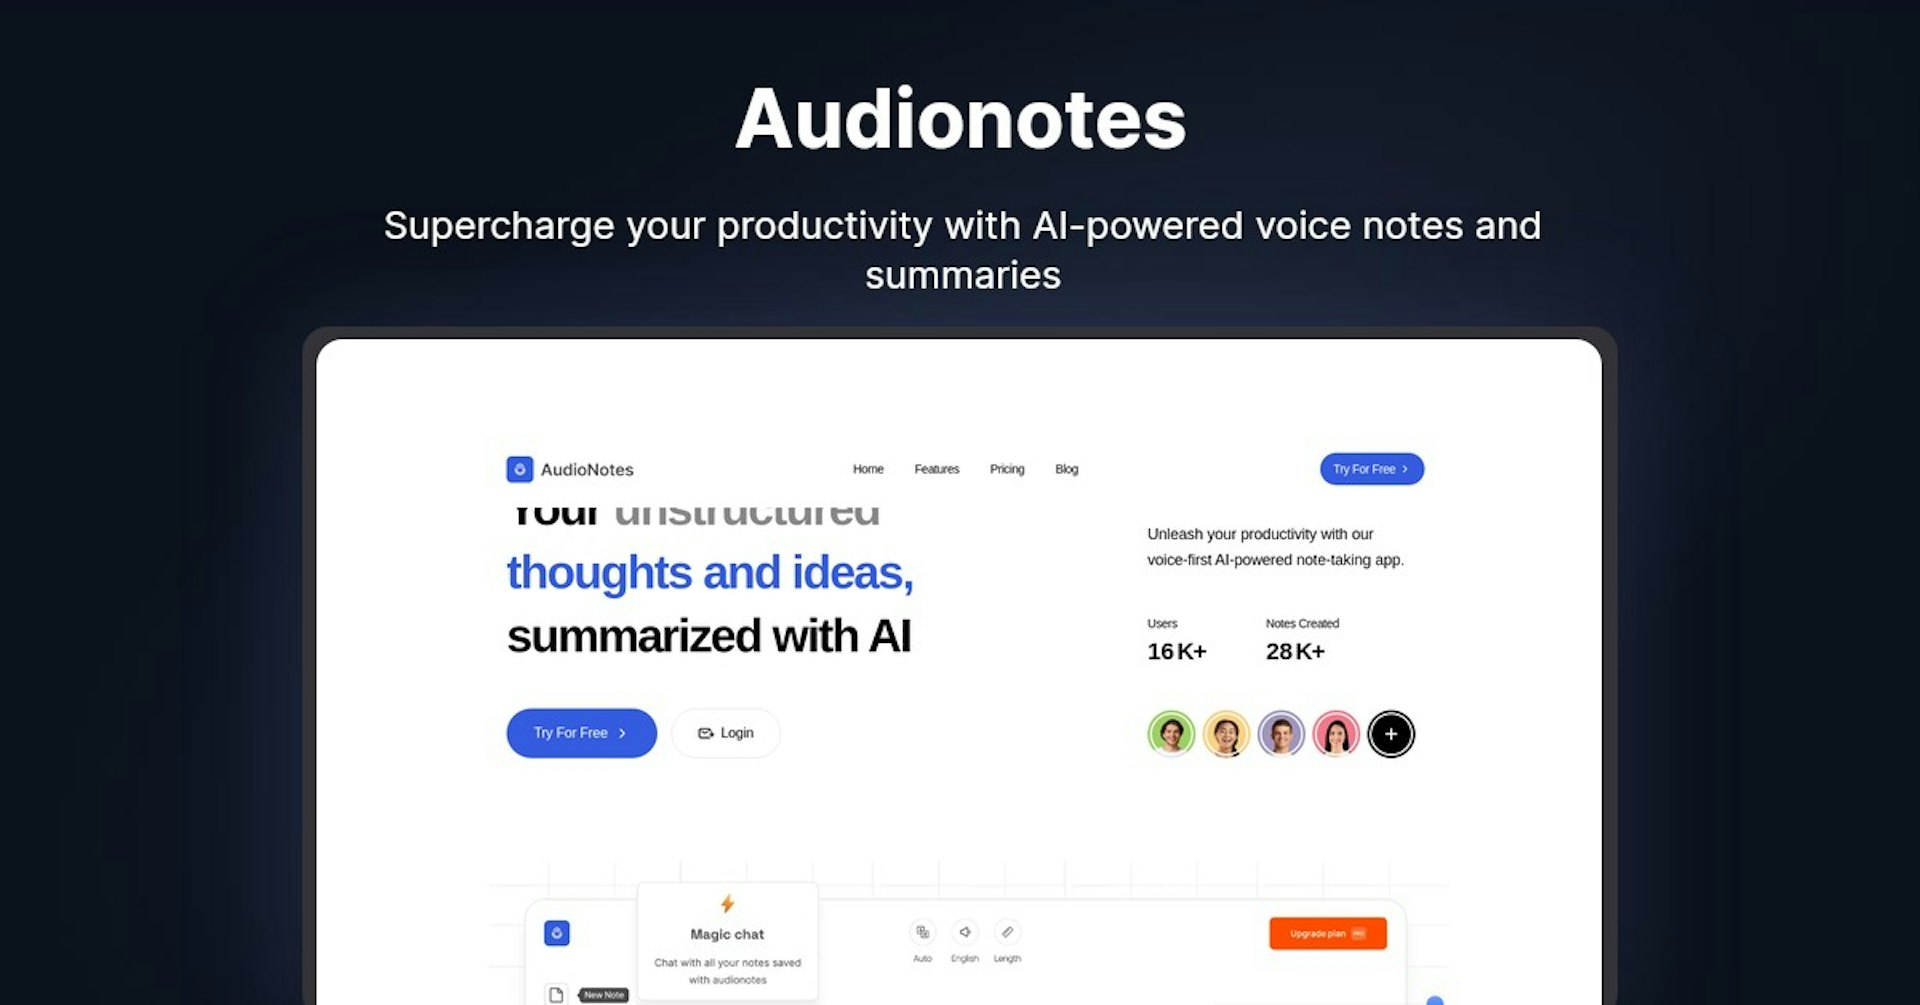 Audionotes